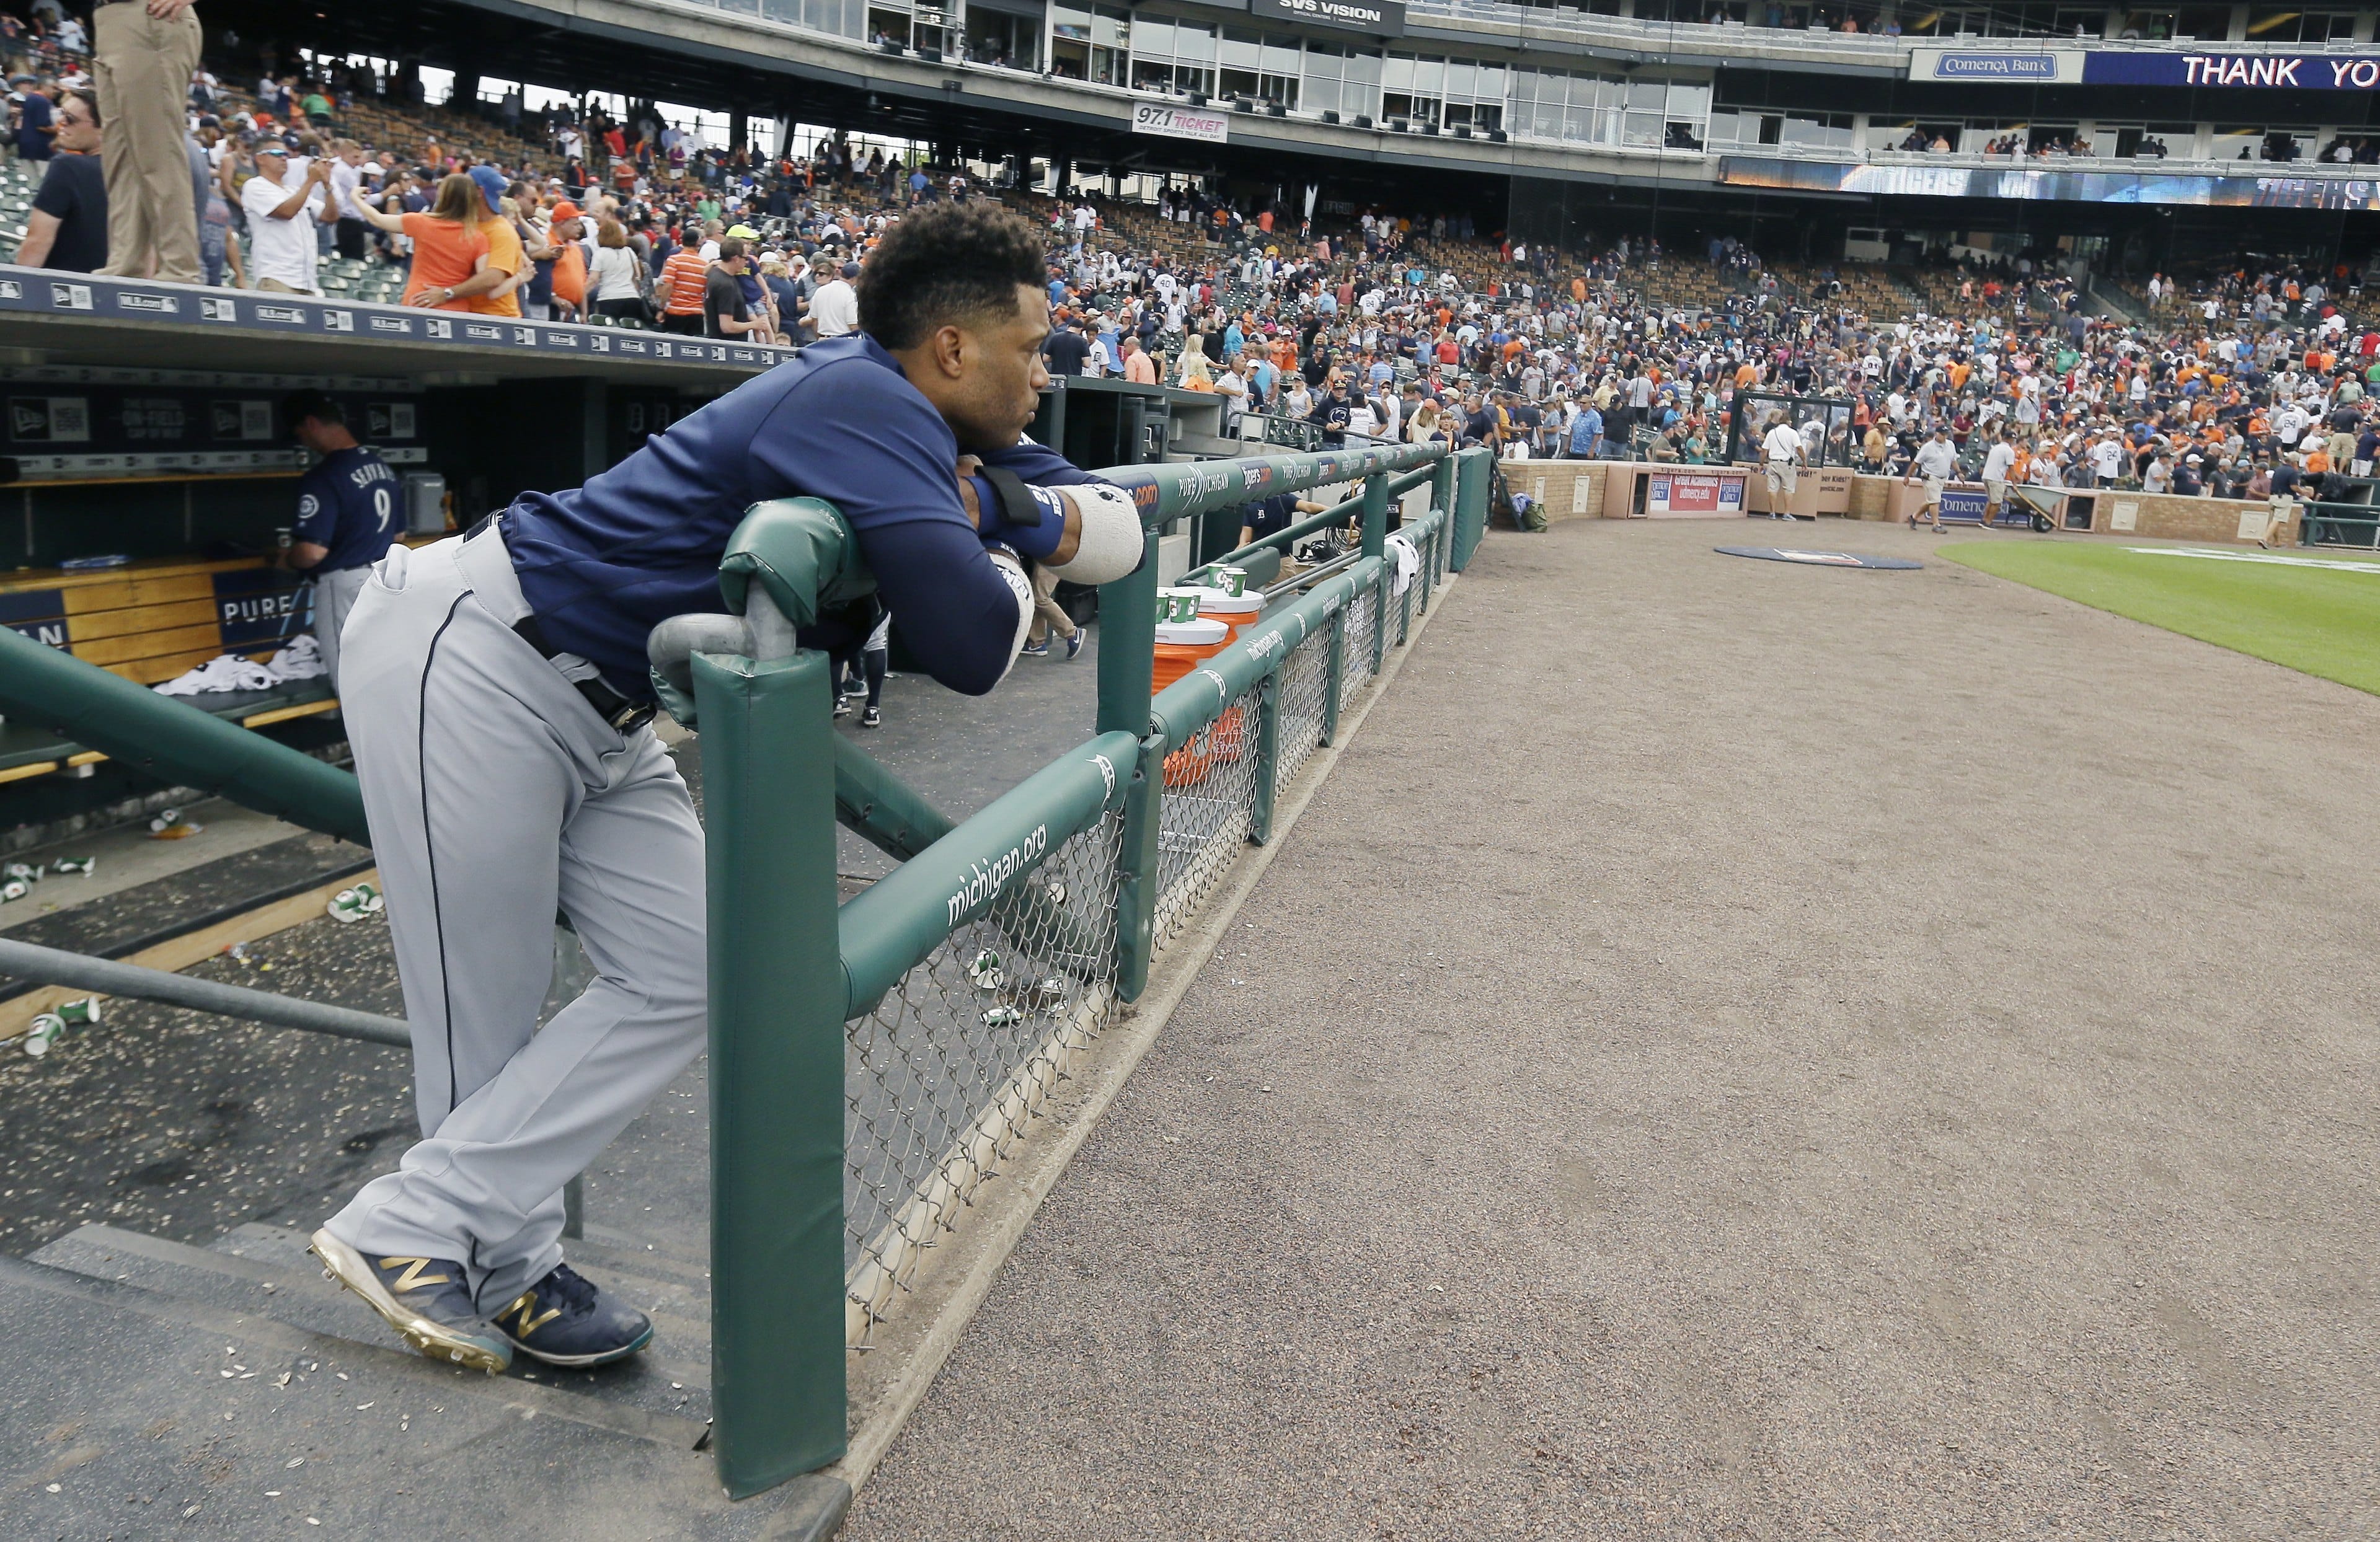 Seattle Mariners' Robinson Cano looks from the dugout after the Detroit Tigers defeated the Mariners in the 10th inning of a baseball game, Thursday, June 23, 2016, in Detroit.